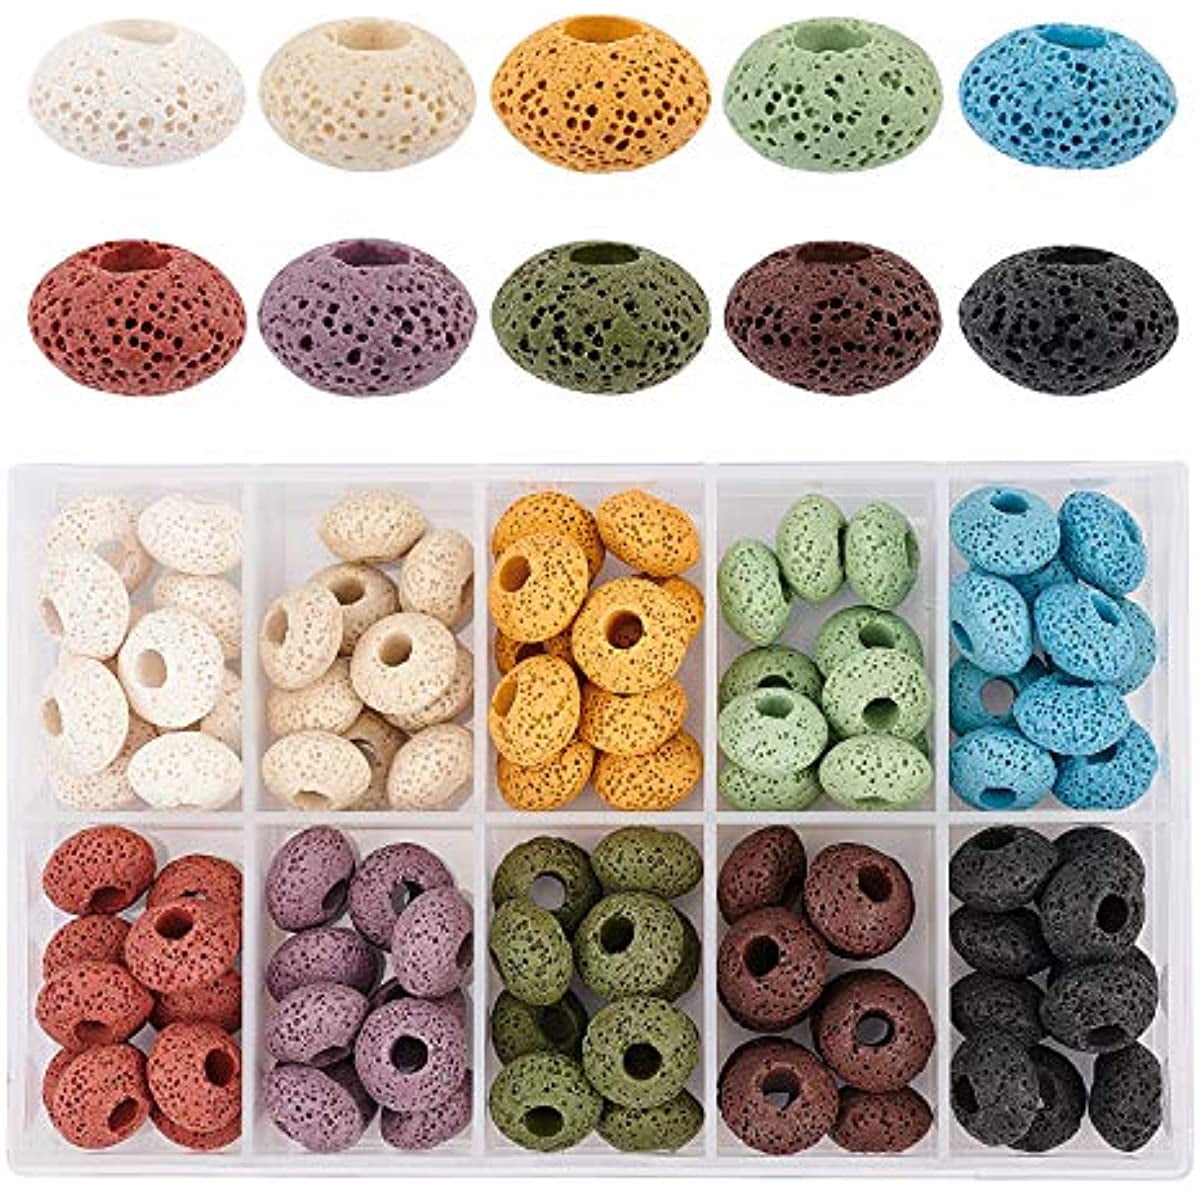 100pcs 10Colors European Beads Flat Round Natural Lava Rock Volcanic  Gemstone for Jewelry Making 